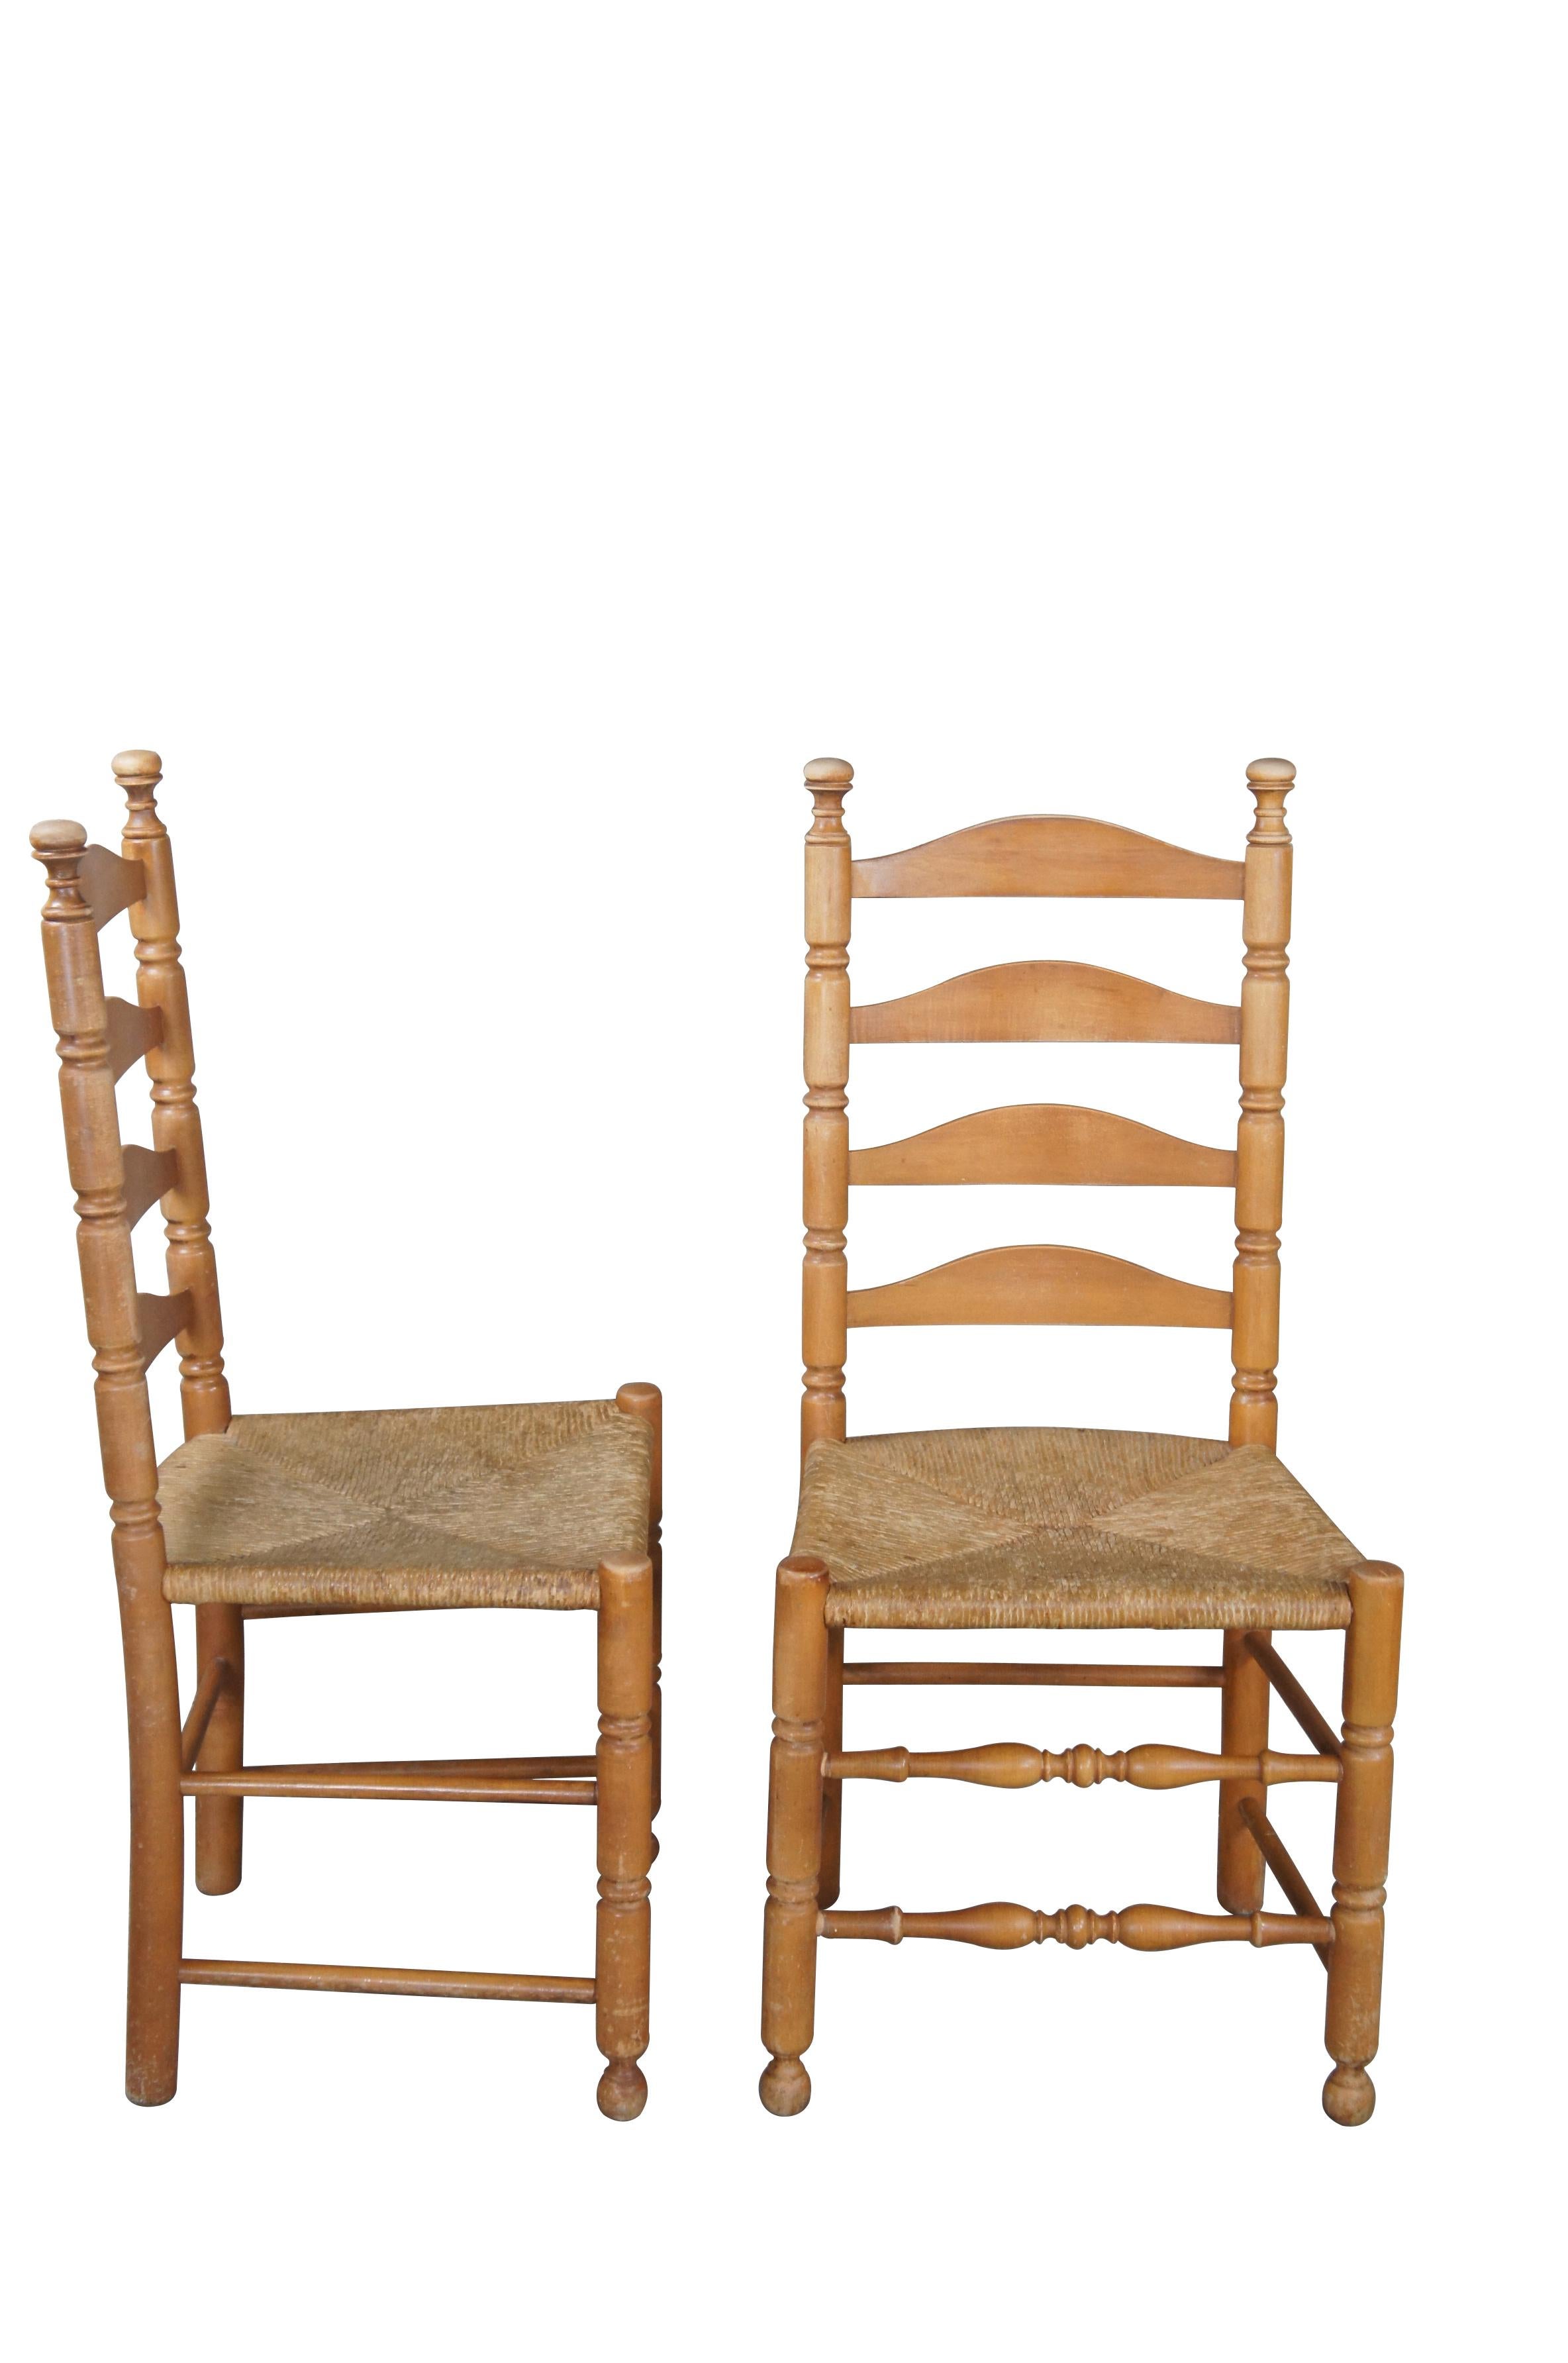 6 Shaker style ladderback dining chairs, circa second half 20th century.  Made from maple with an arched ladderback and rush seat.  The chairs are supported by ribbed front legs with turned stretchers in between.  

Dimensions:
19.5